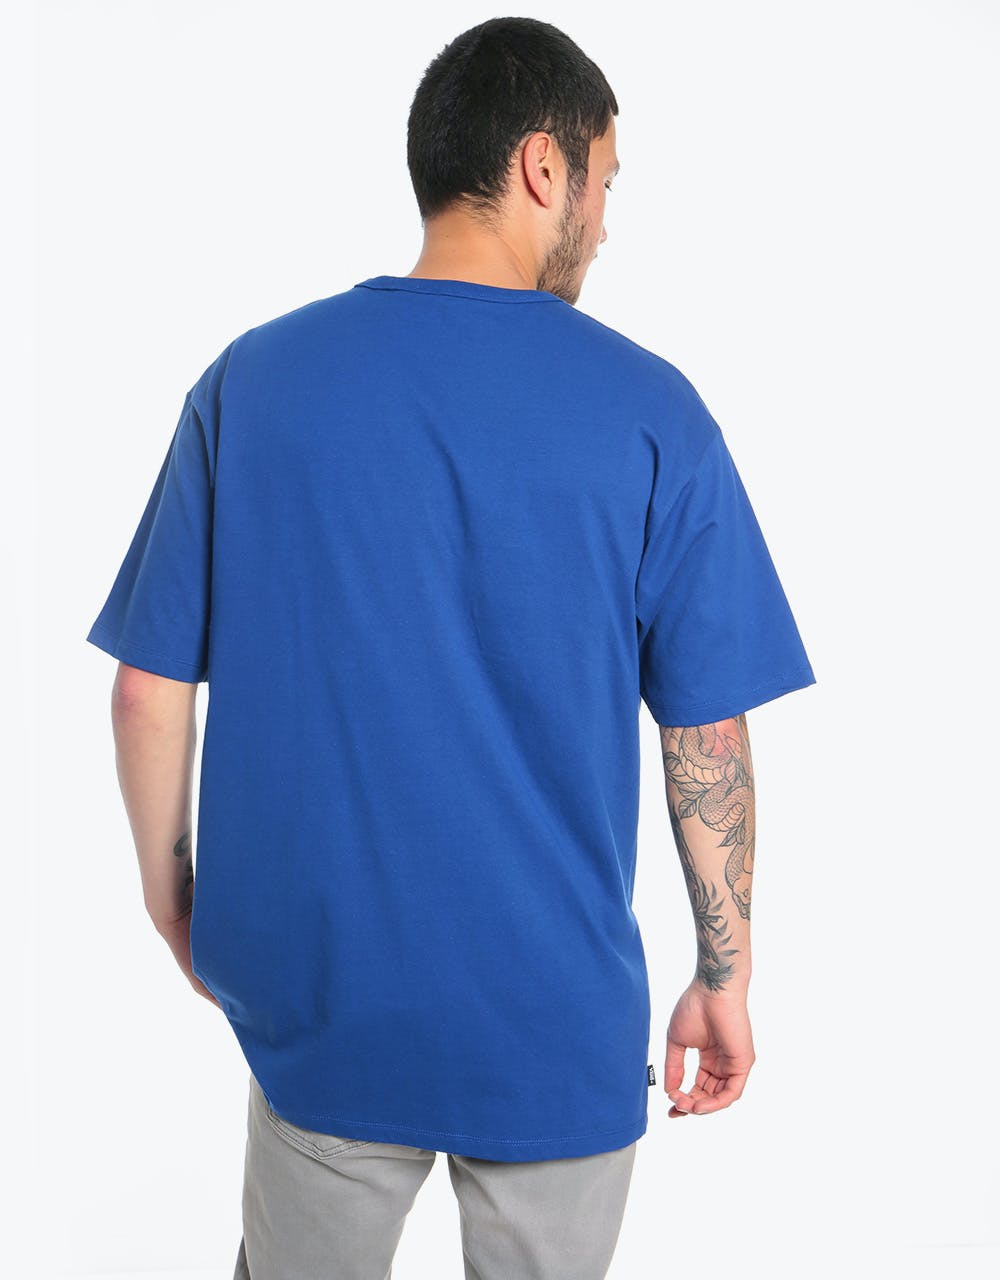 Vans Off The Wall Classic T-Shirt - Sodalite Blue